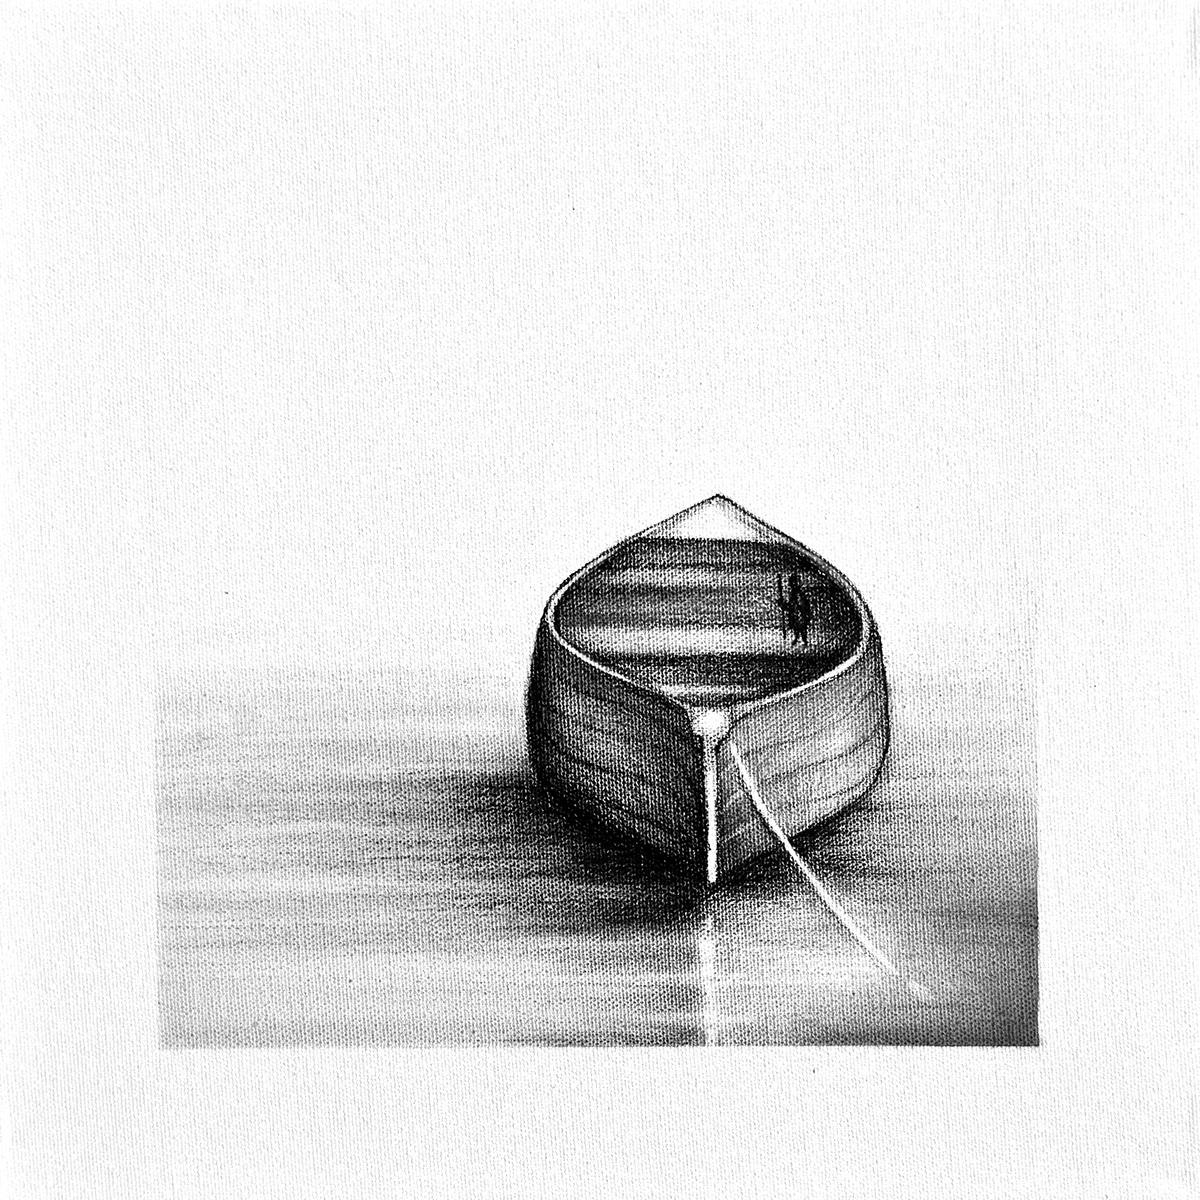 wood graphite pencil charcoal canvas clay blackandwhite black & white black and white Hidden things tiny houses Curious Things art Tiny Worlds tiny world